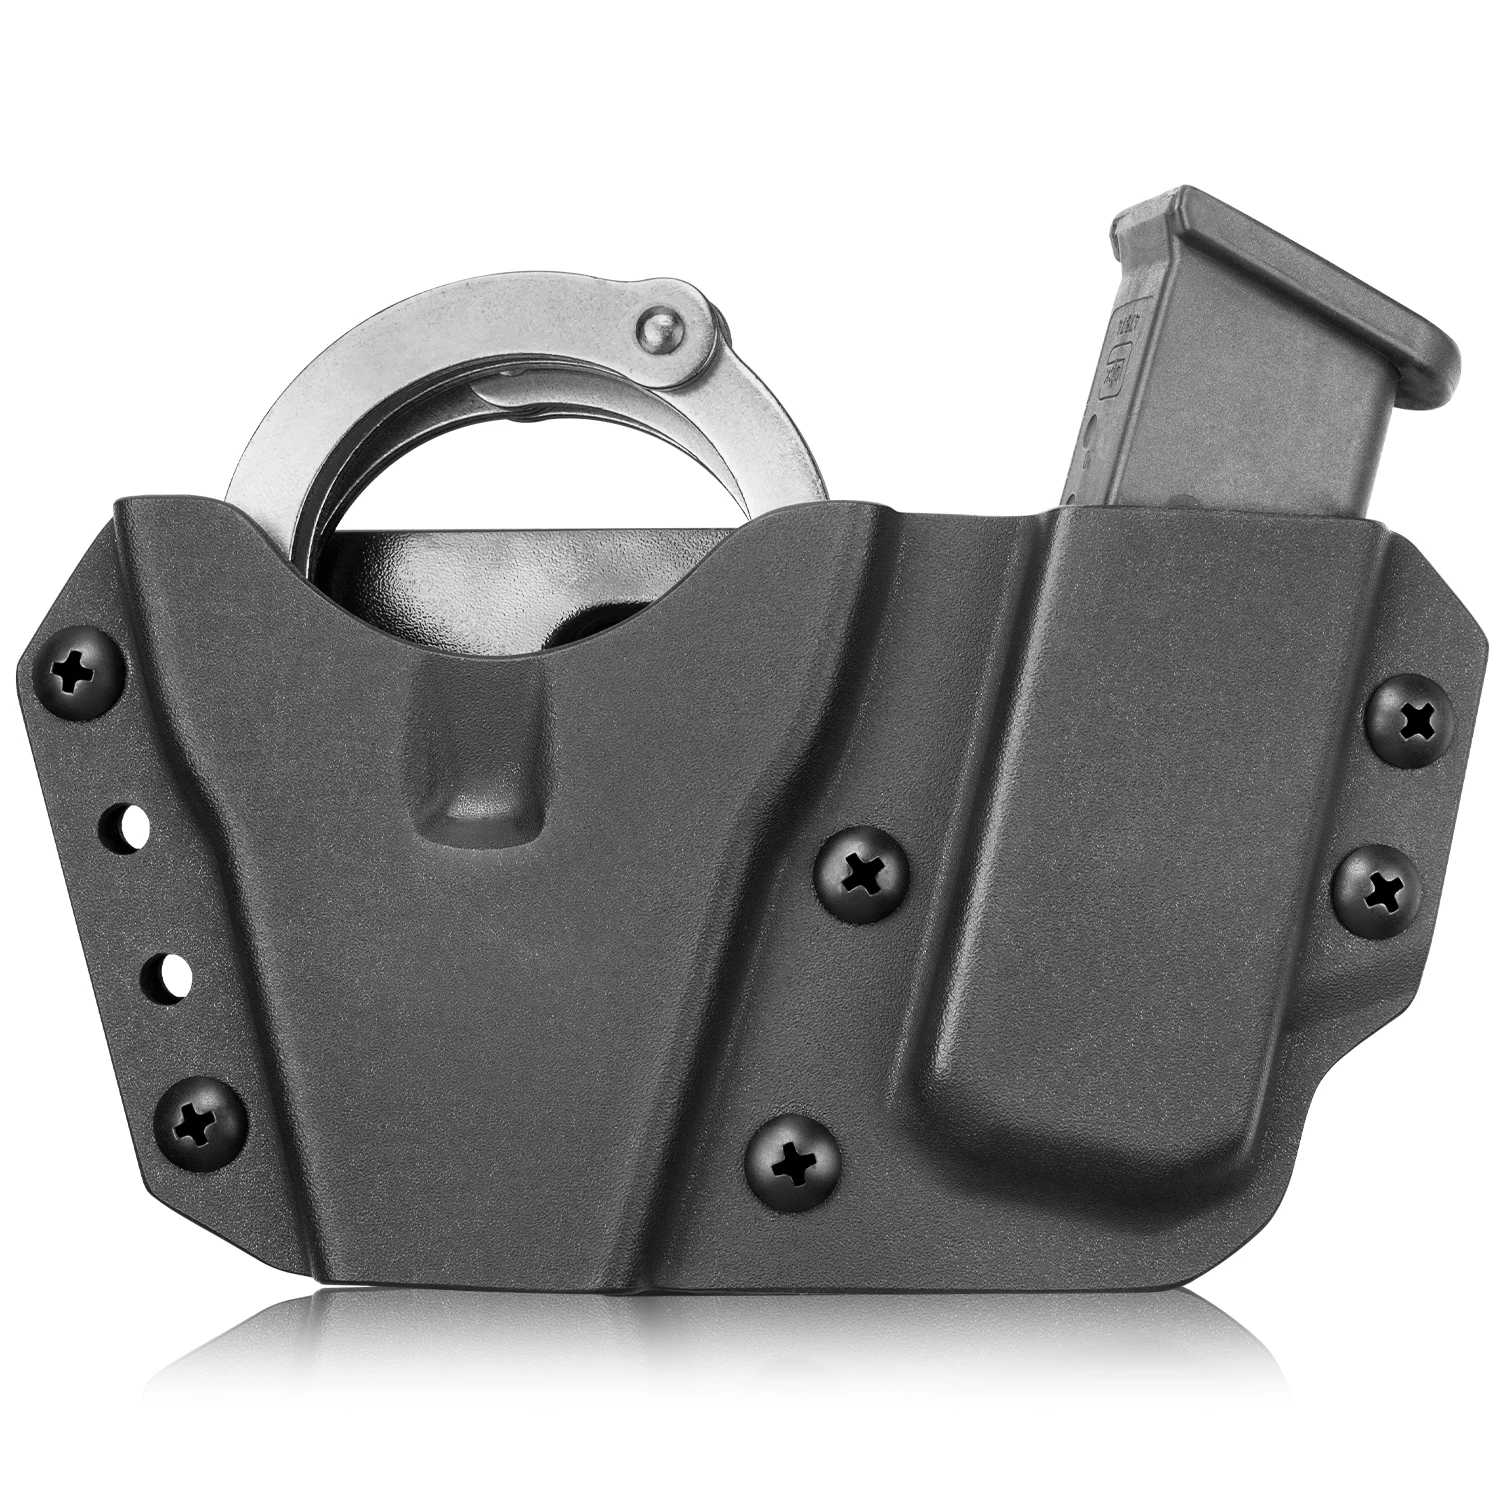 Kydex Handcuff Holster with 9/.40 Double Stack Mag Holder Combo Handcuff Holder for Hinged Handcuff Chain